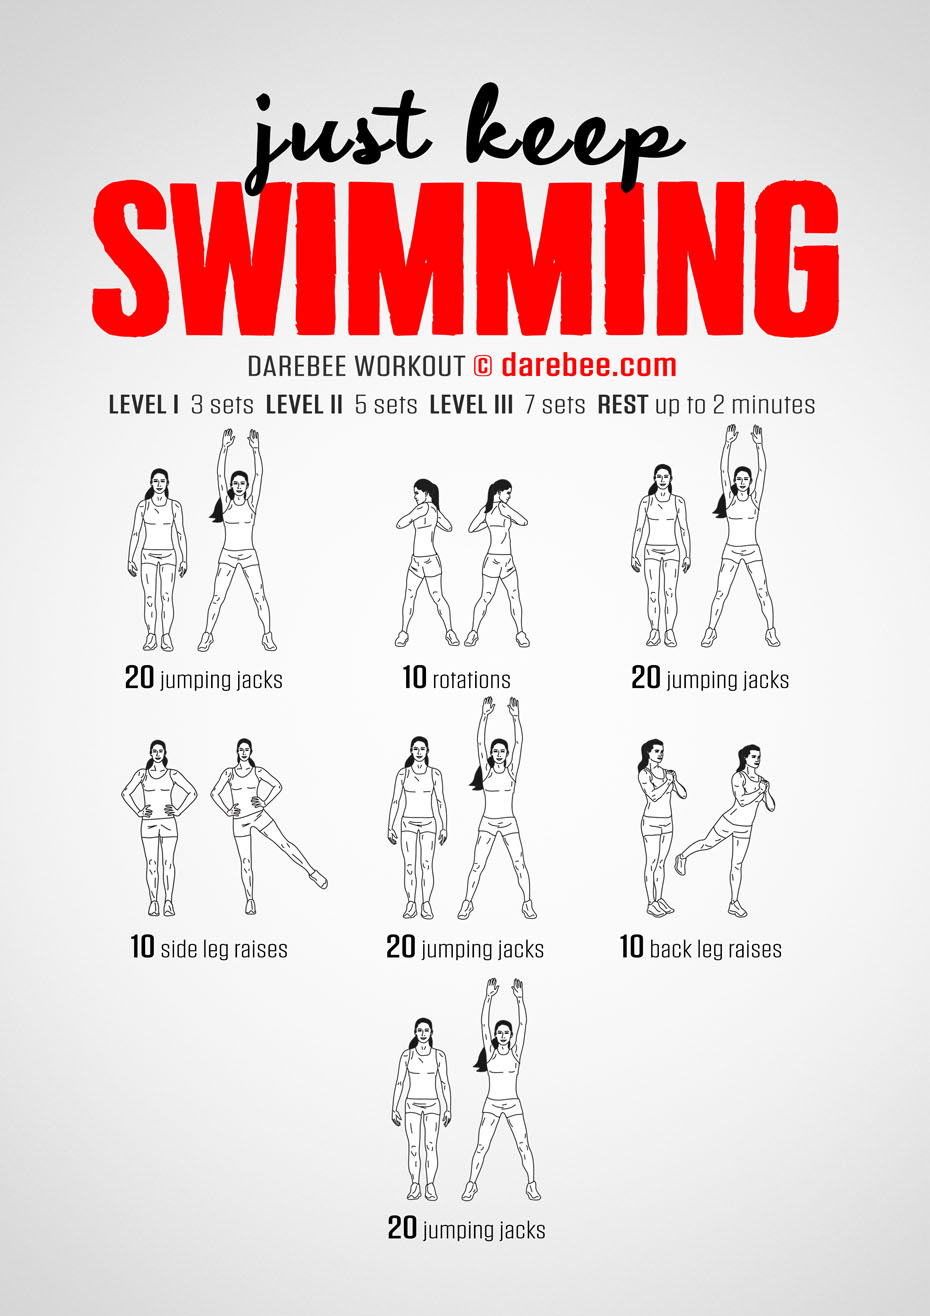 Just Keep Swimming is a Darebee home-fitness workout that helps your mind and body be strong.  